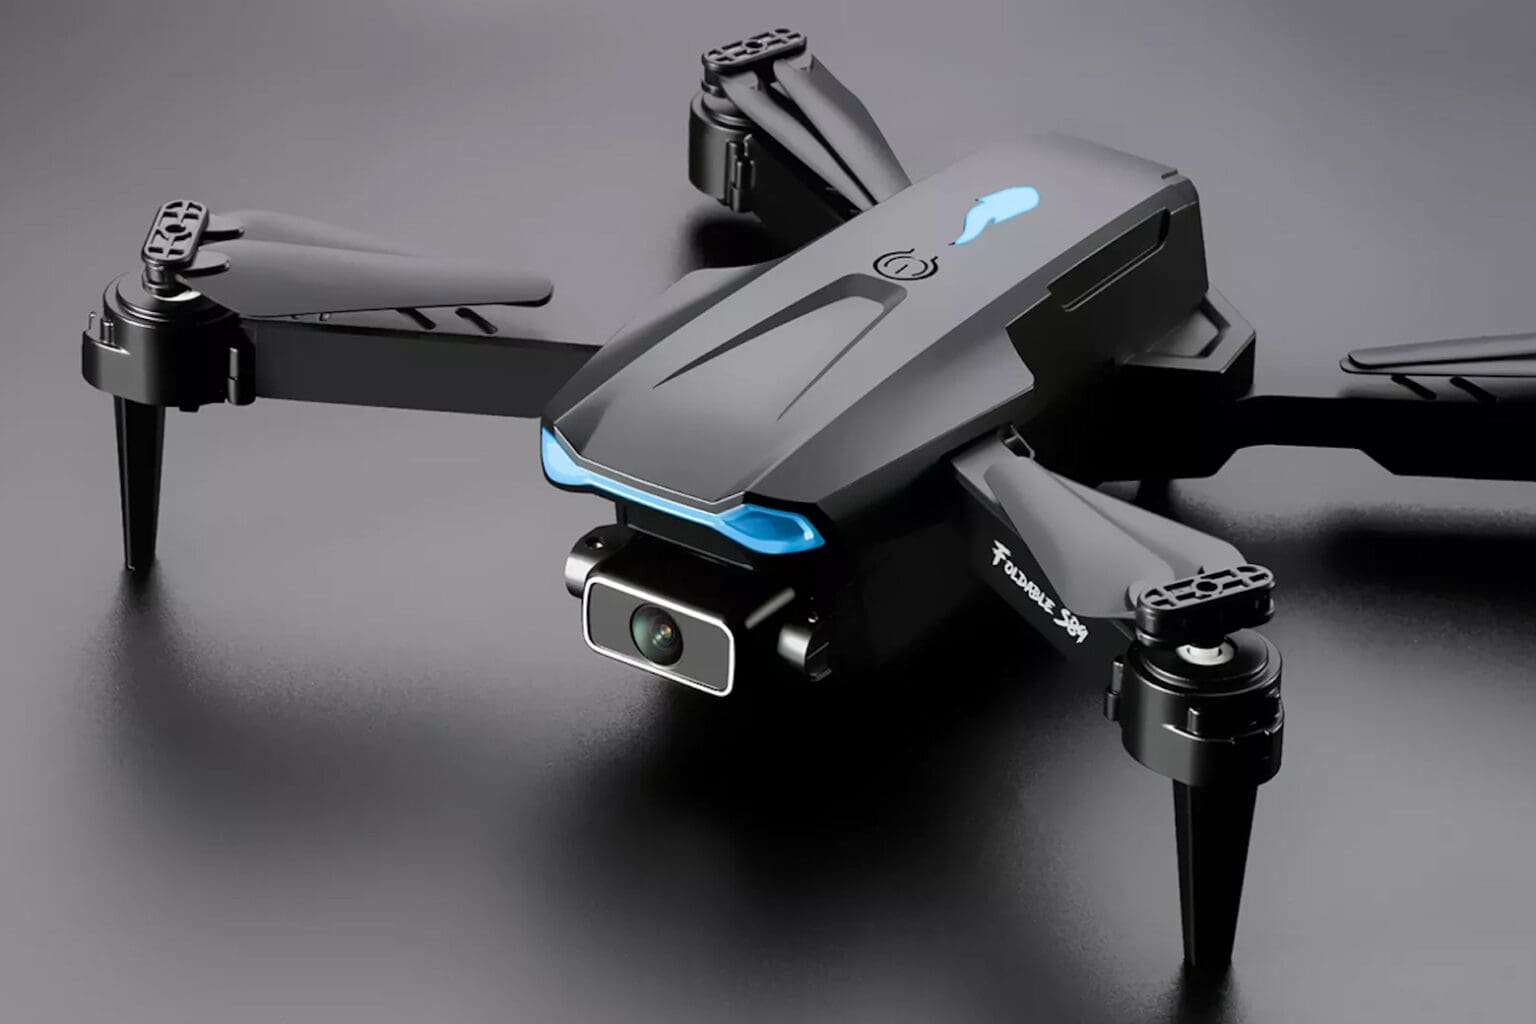 This 4K HD starter drone has a 330 foot range, and it's only $89.99.